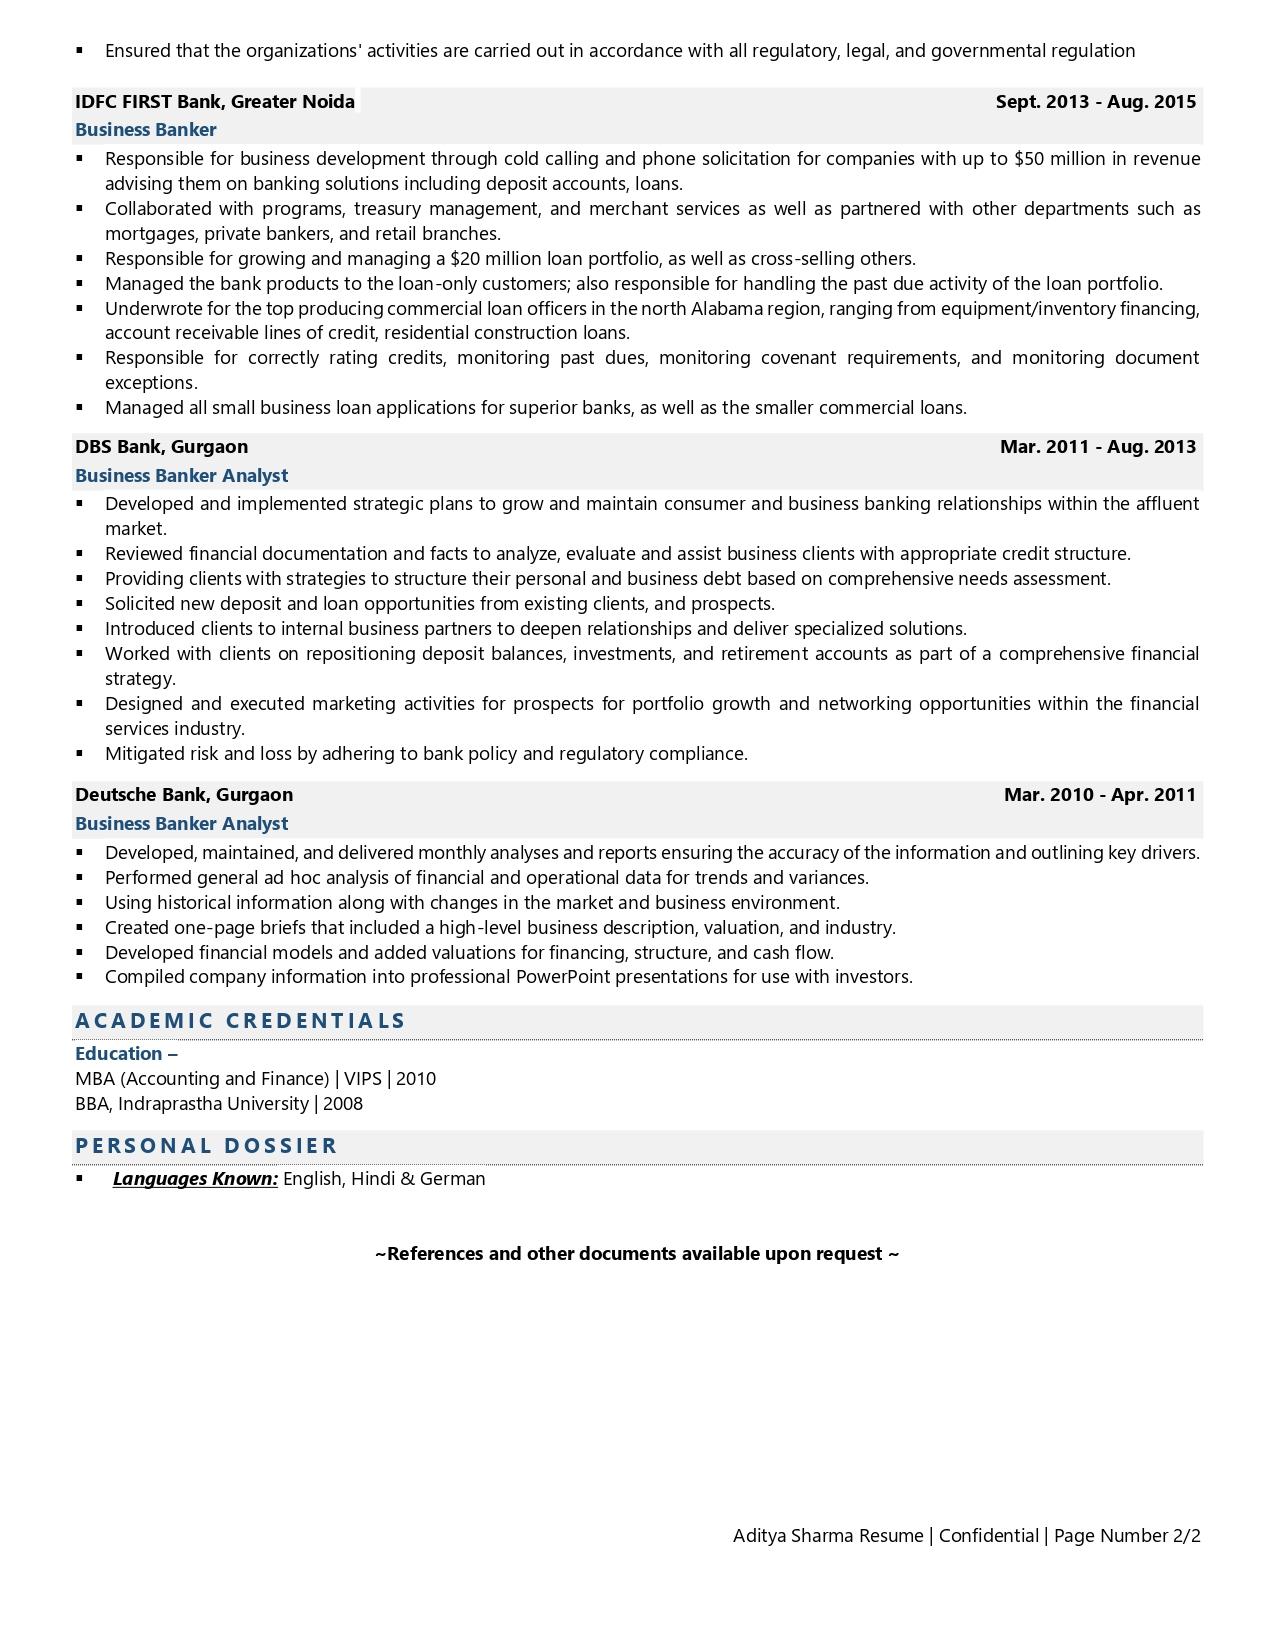 Business Banker - Resume Example & Template